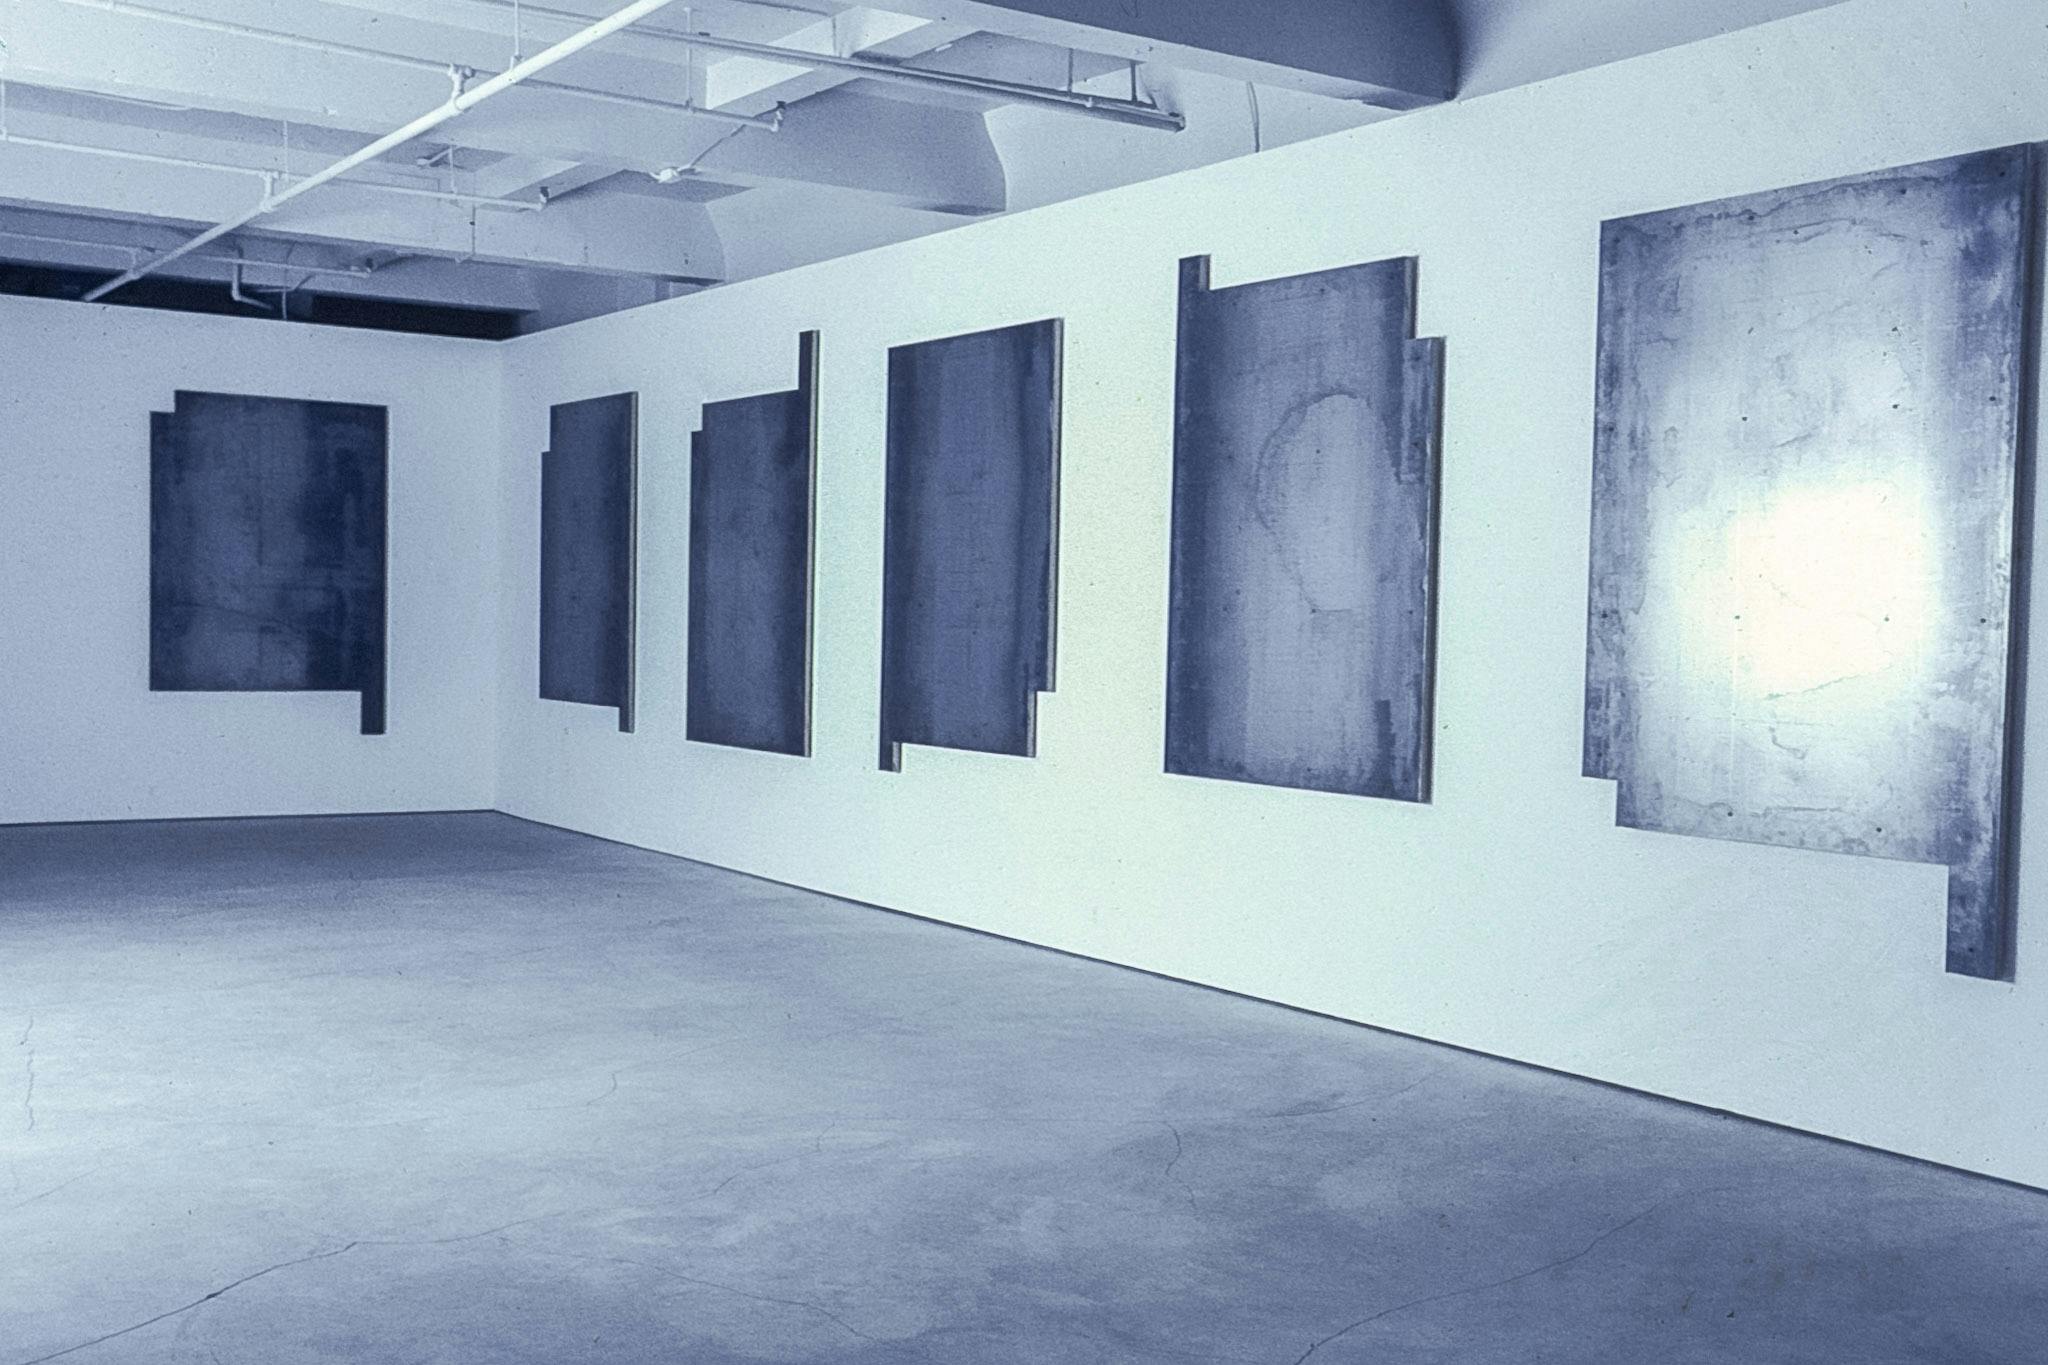 In the dark corner of a gallery, several rectangular metal panels hang on the wall. Their surfaces are scuffed and marked, and the single light source in the room reflects brightly from them.